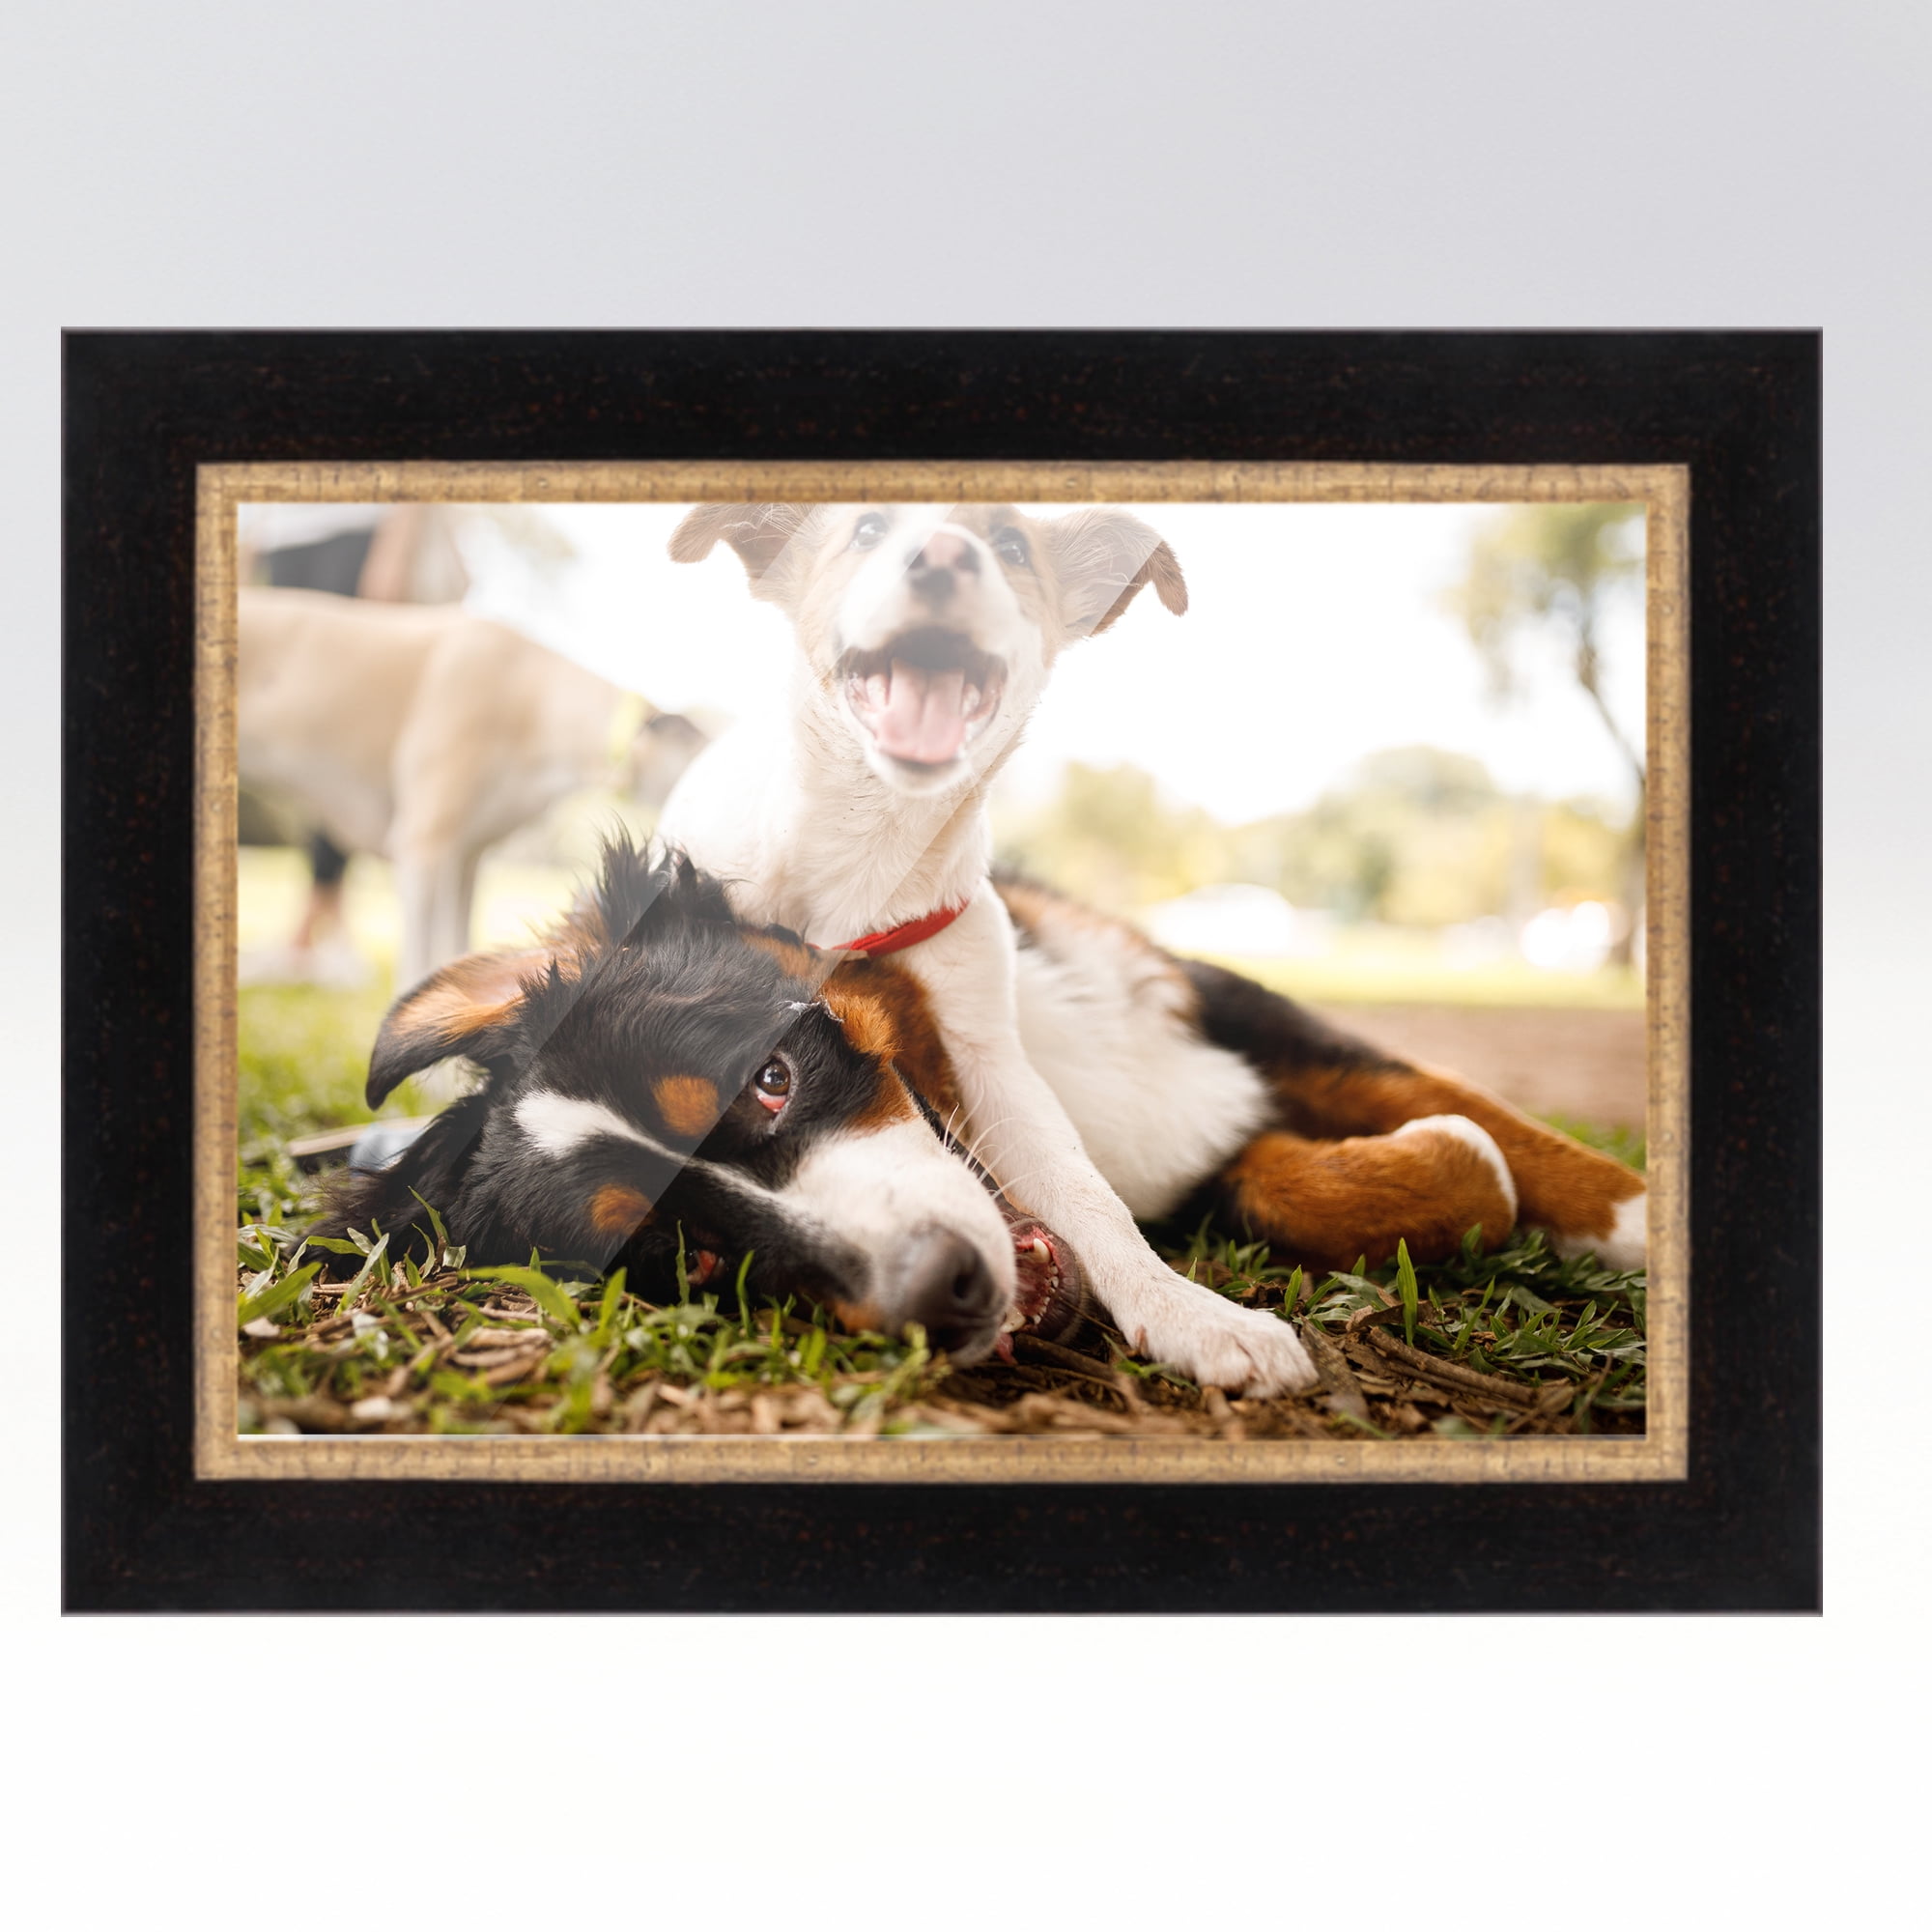 CustomPictureFrames.com 16x24 Frame Gold Real Wood Picture Frame Width 1.75 Inches | Interior Frame Depth 0.5 Inches | Serpero Traditional Photo Frame